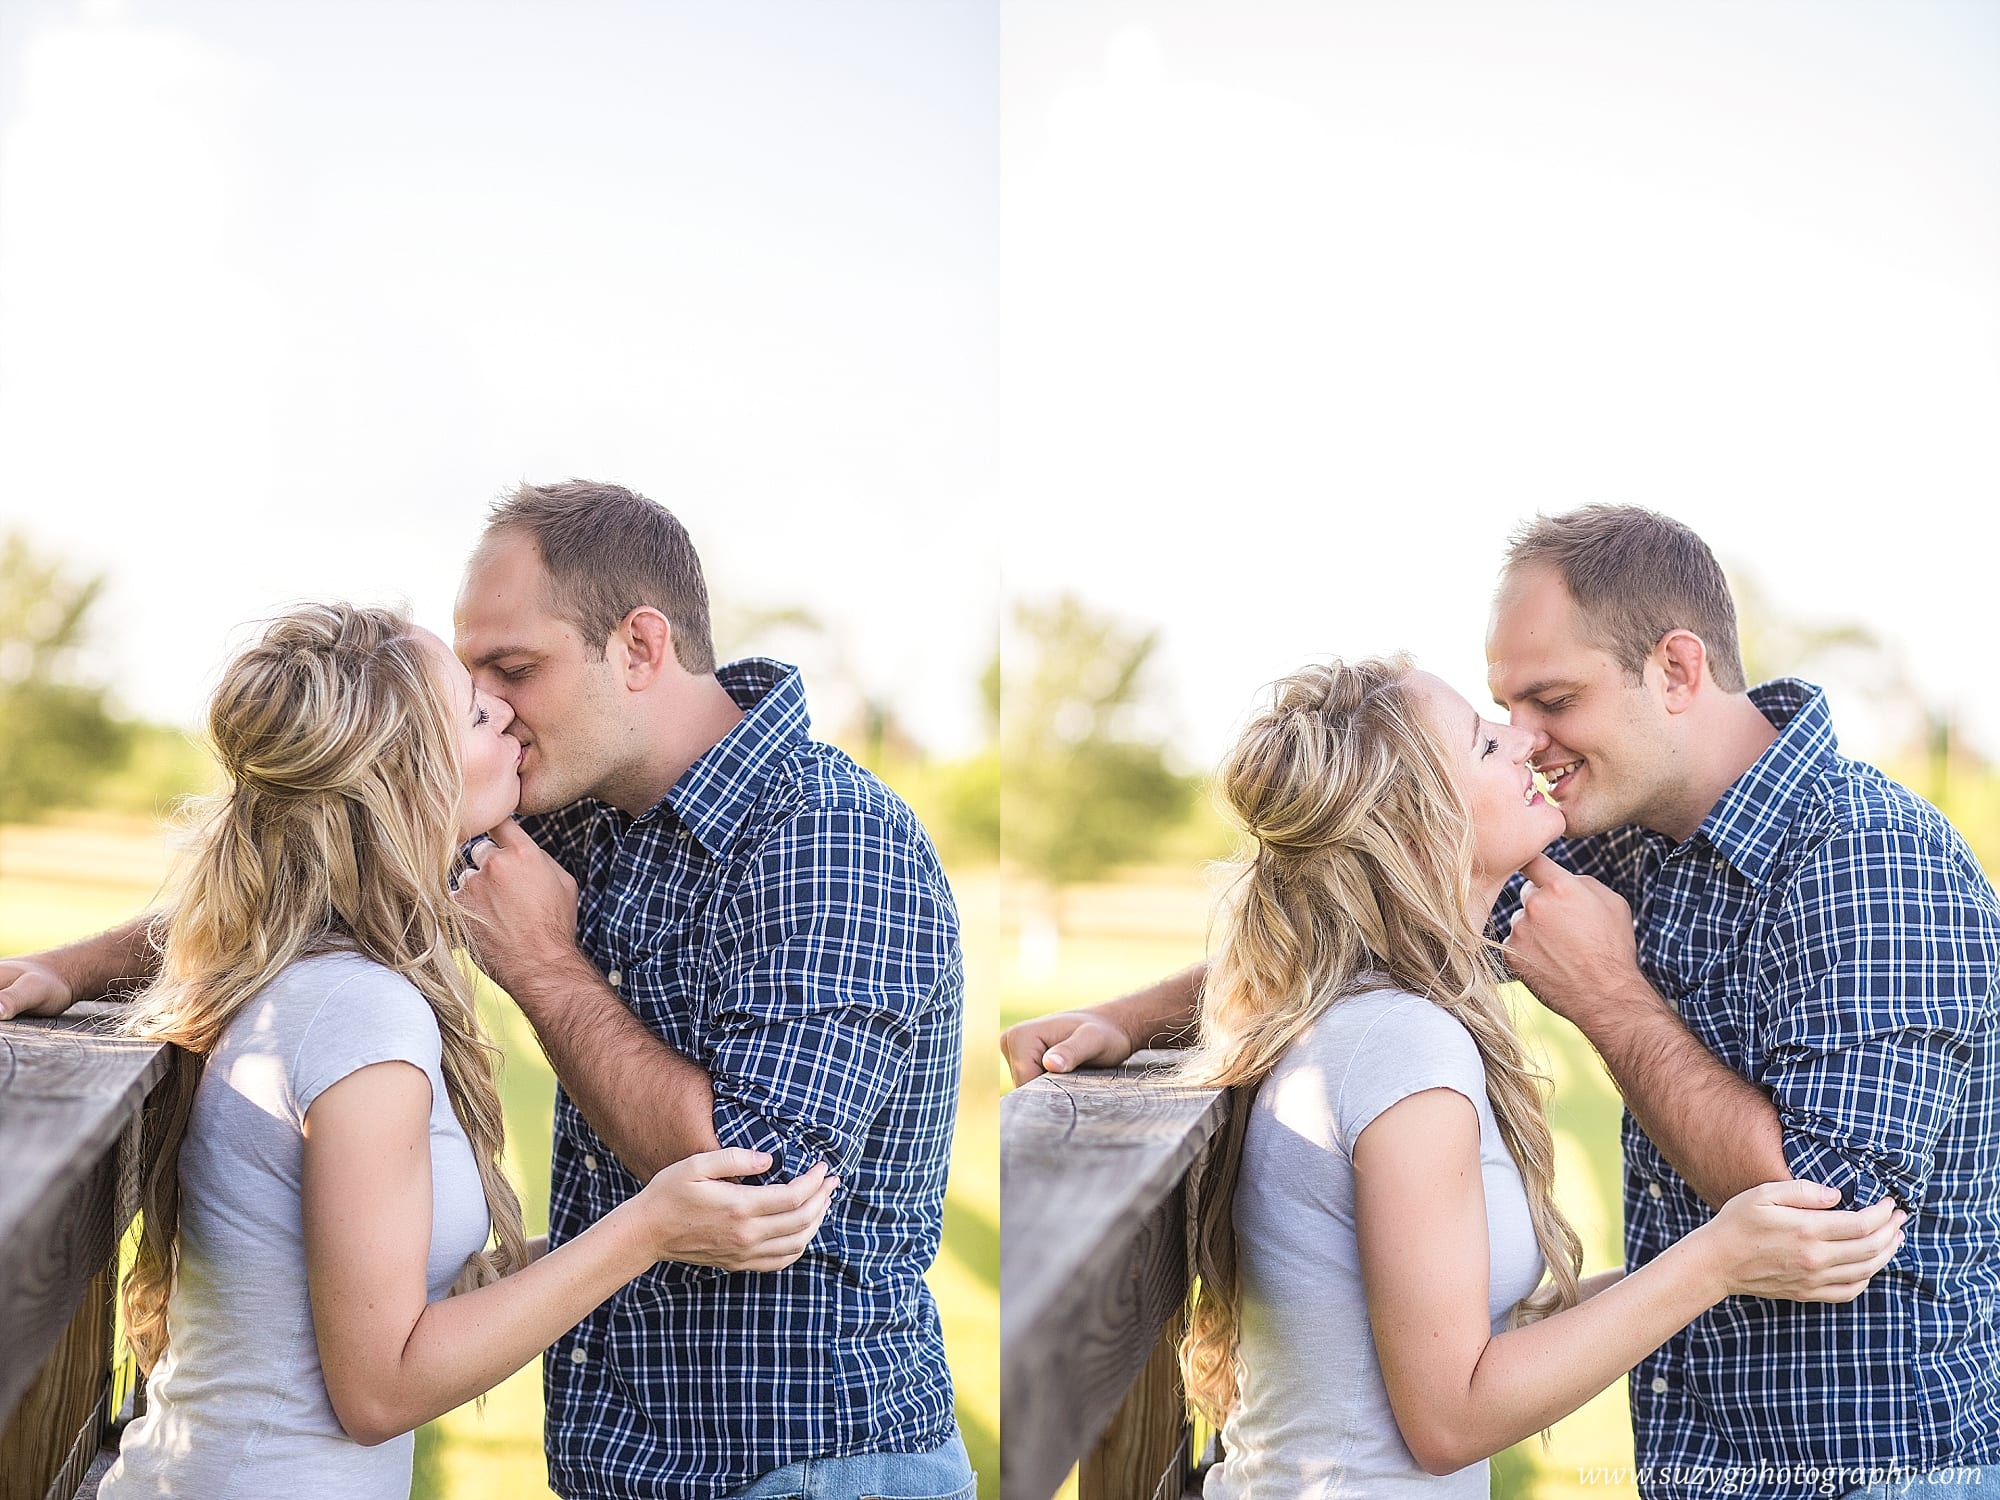 engagements-new orleans-texas-baton rouge-lake charles-suzy g-photography-suzygphotography_0021